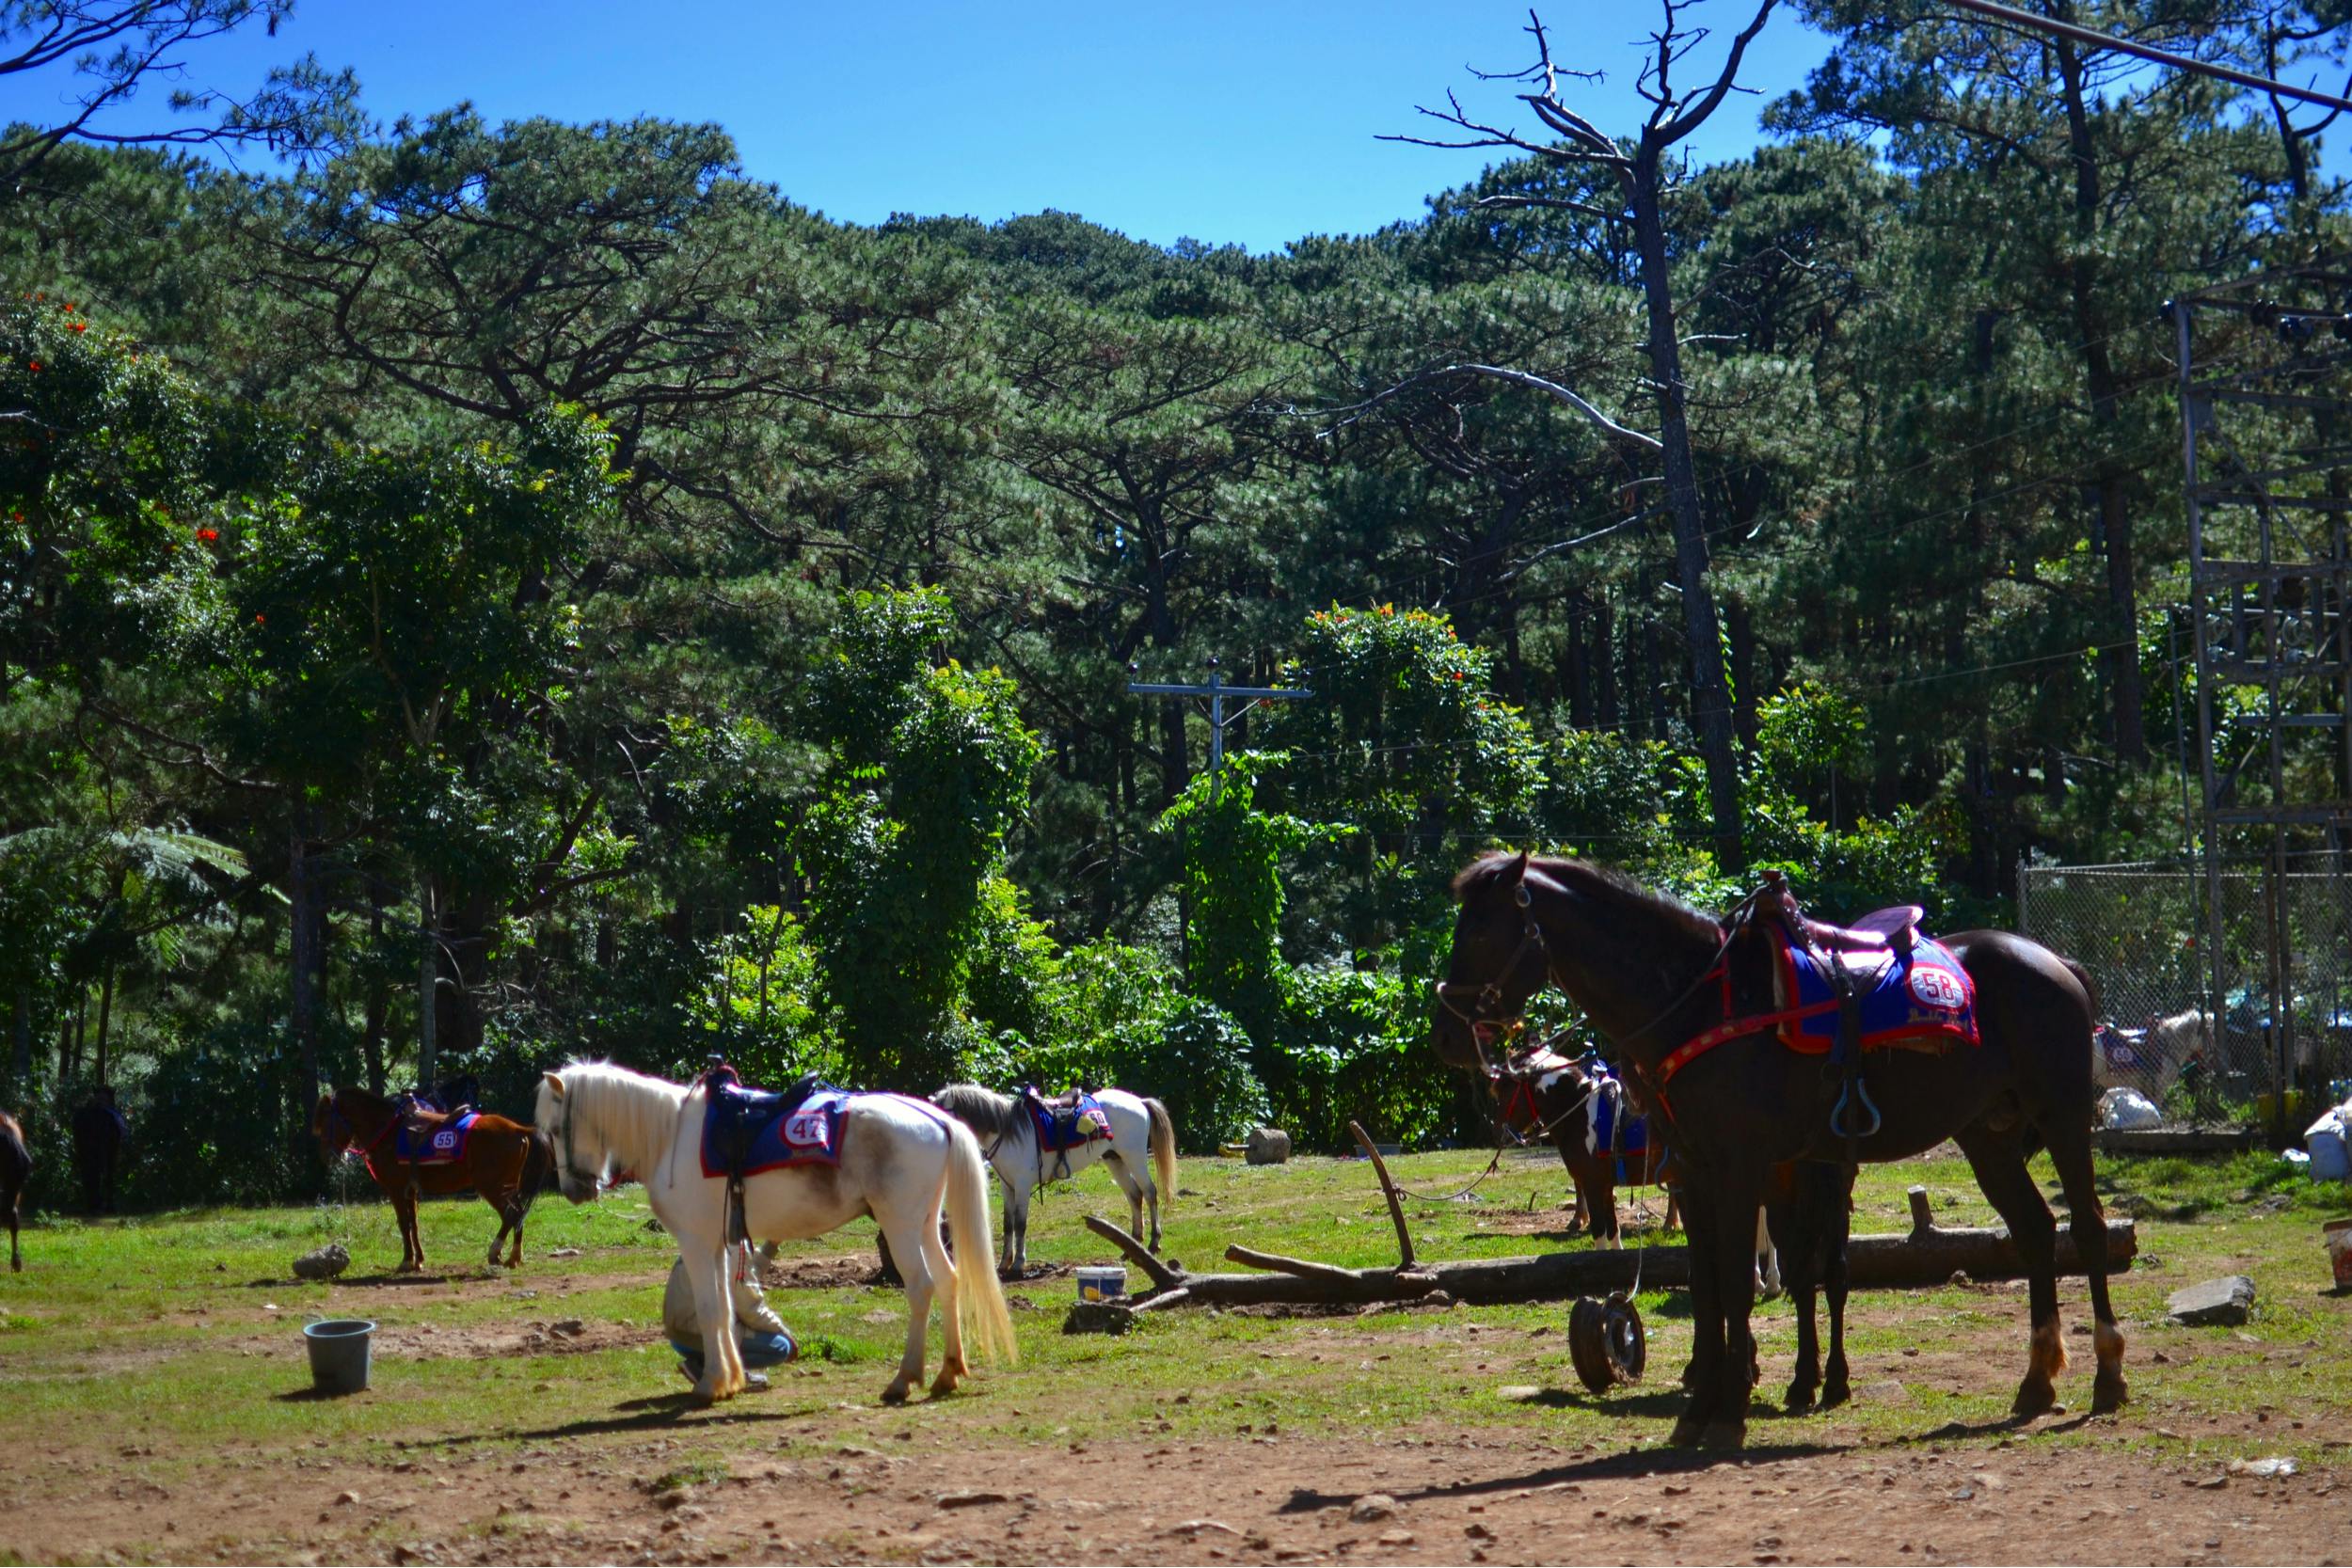 Horses in a park in Baguio City